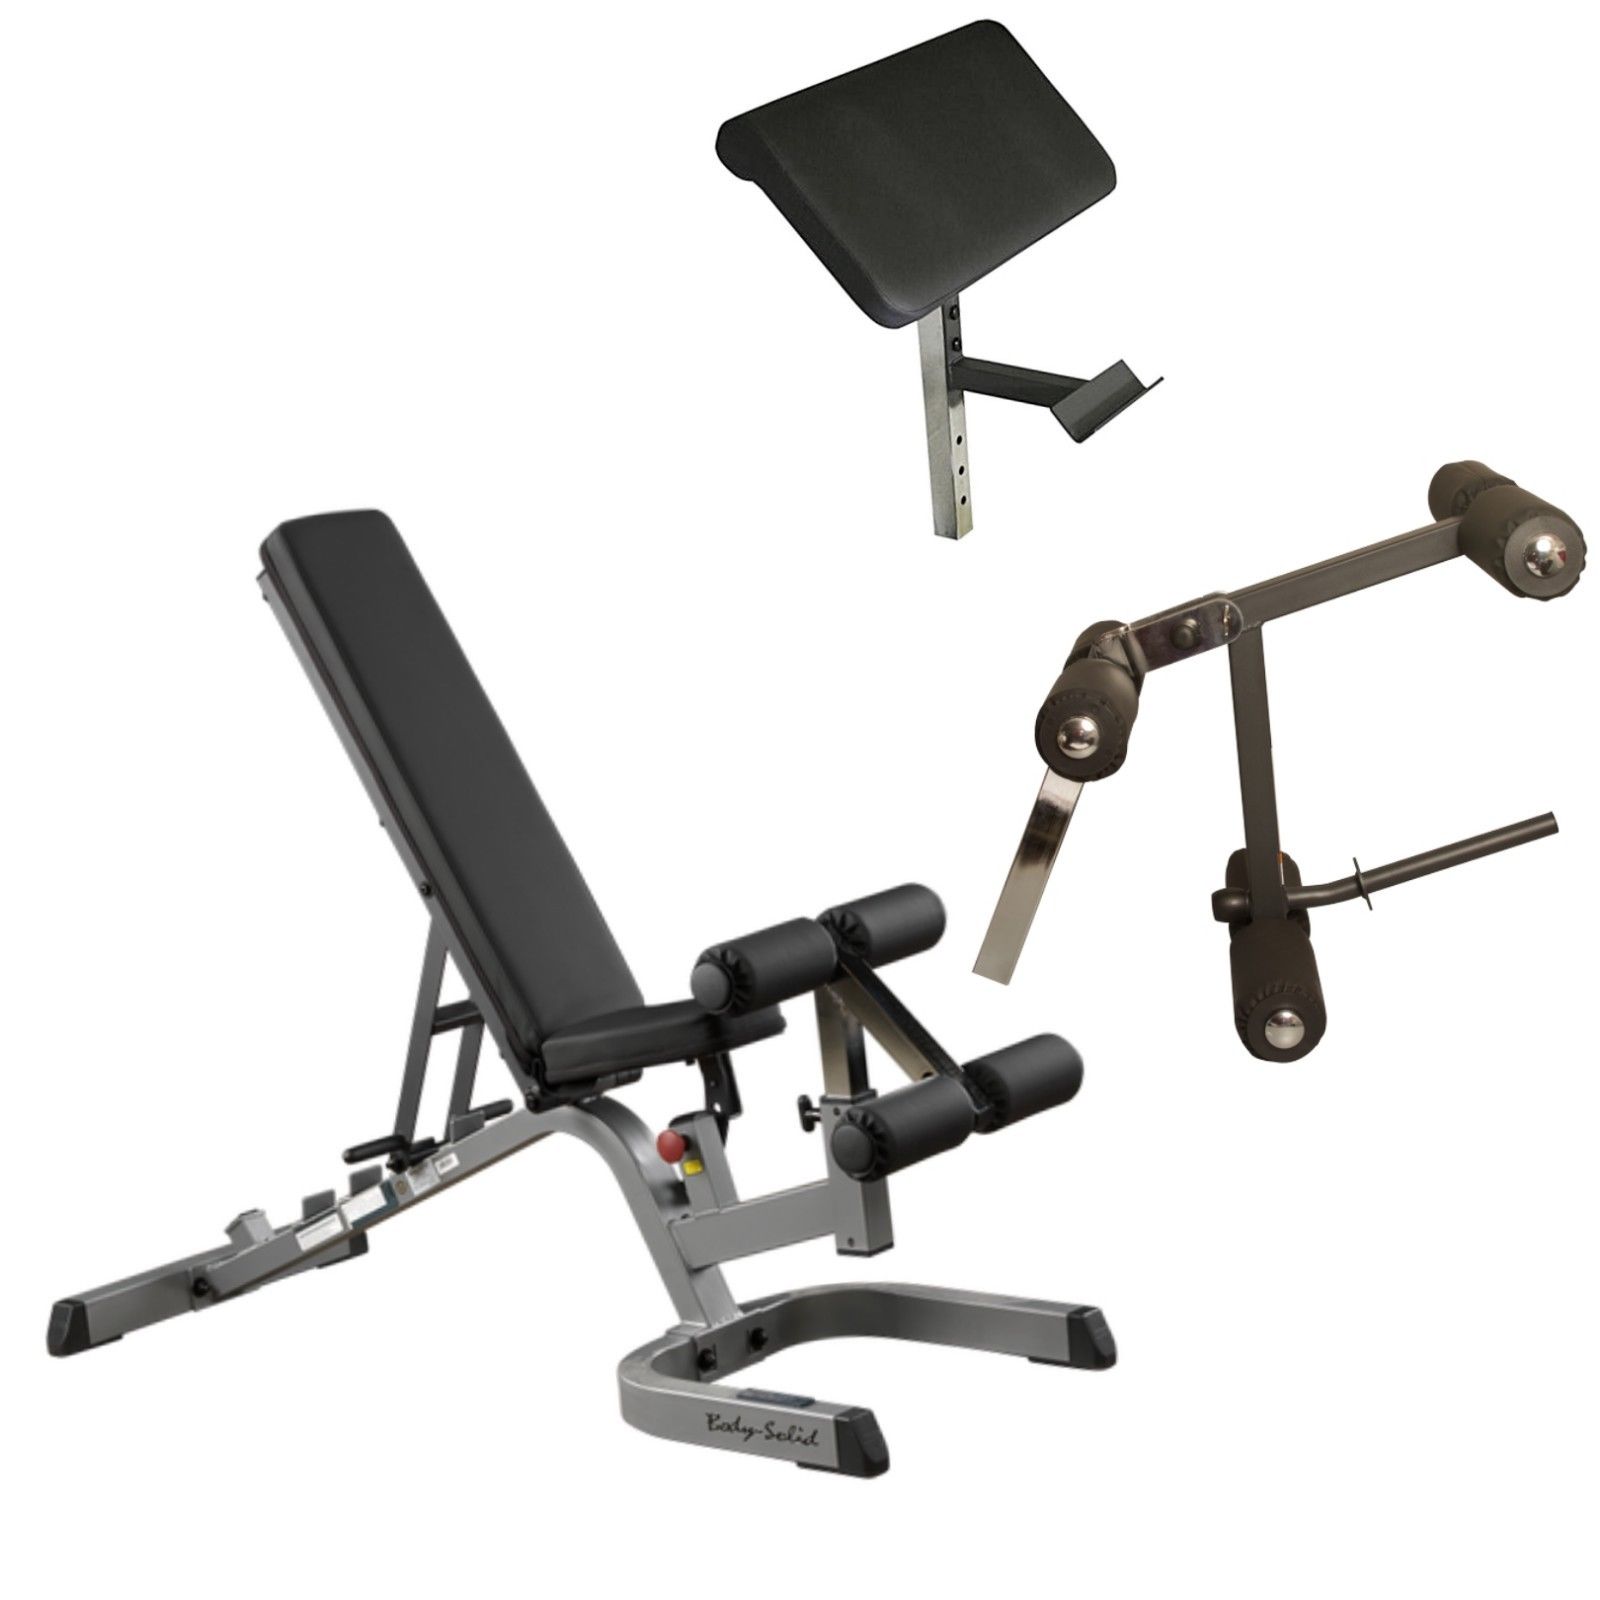 Adjustable Weight Benches for Full Body Workout with Ultra-wide Frame 